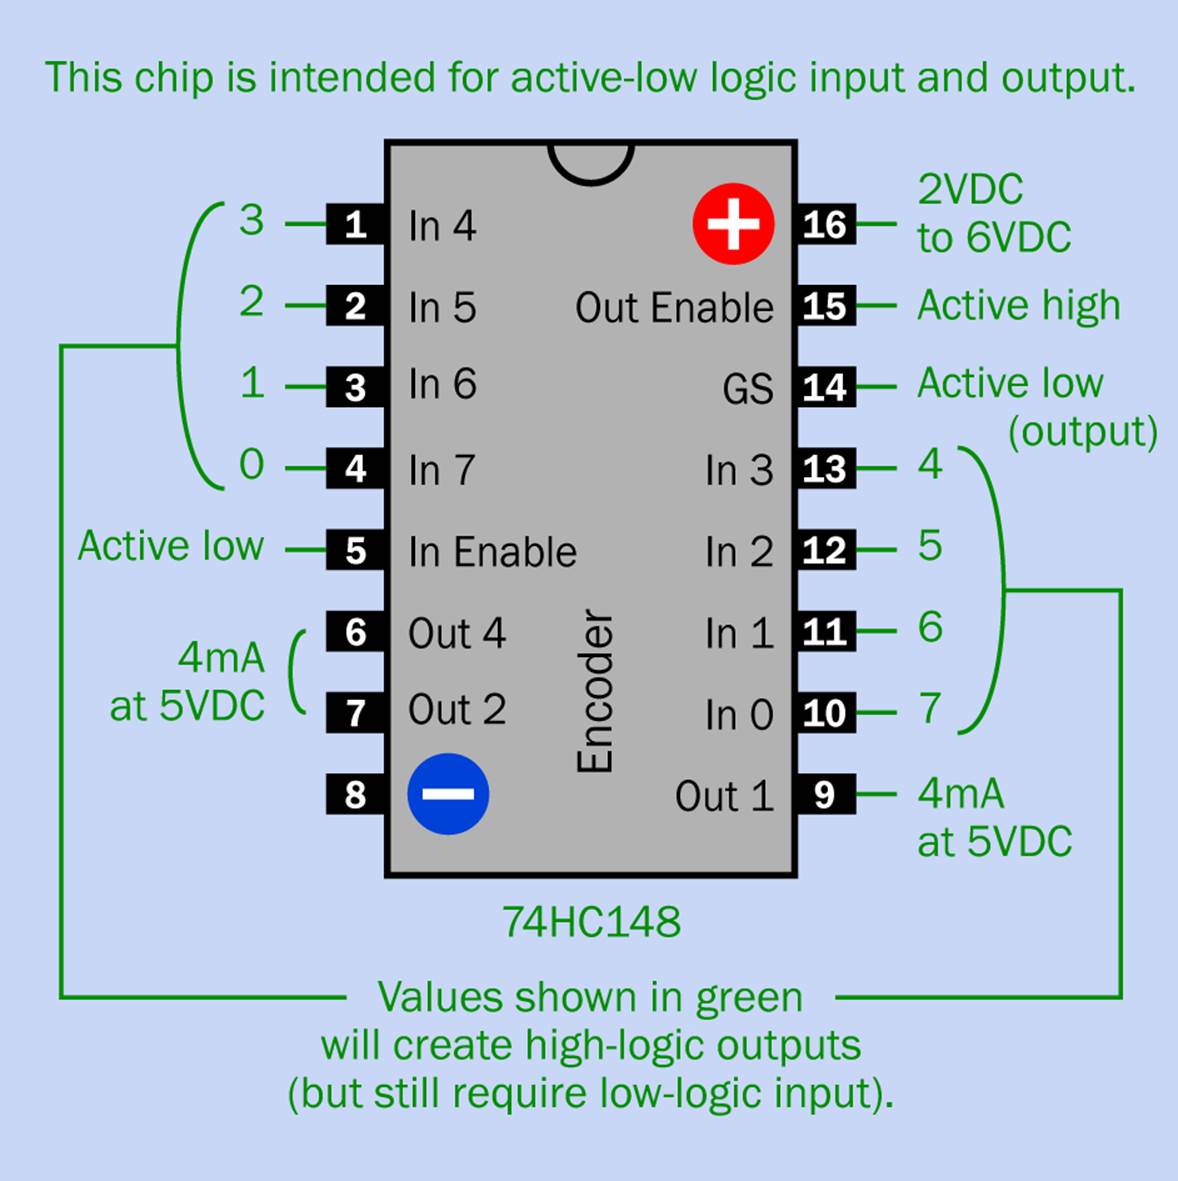 Pinouts for the 74HC148 encoder chip. See text for details about input and output.